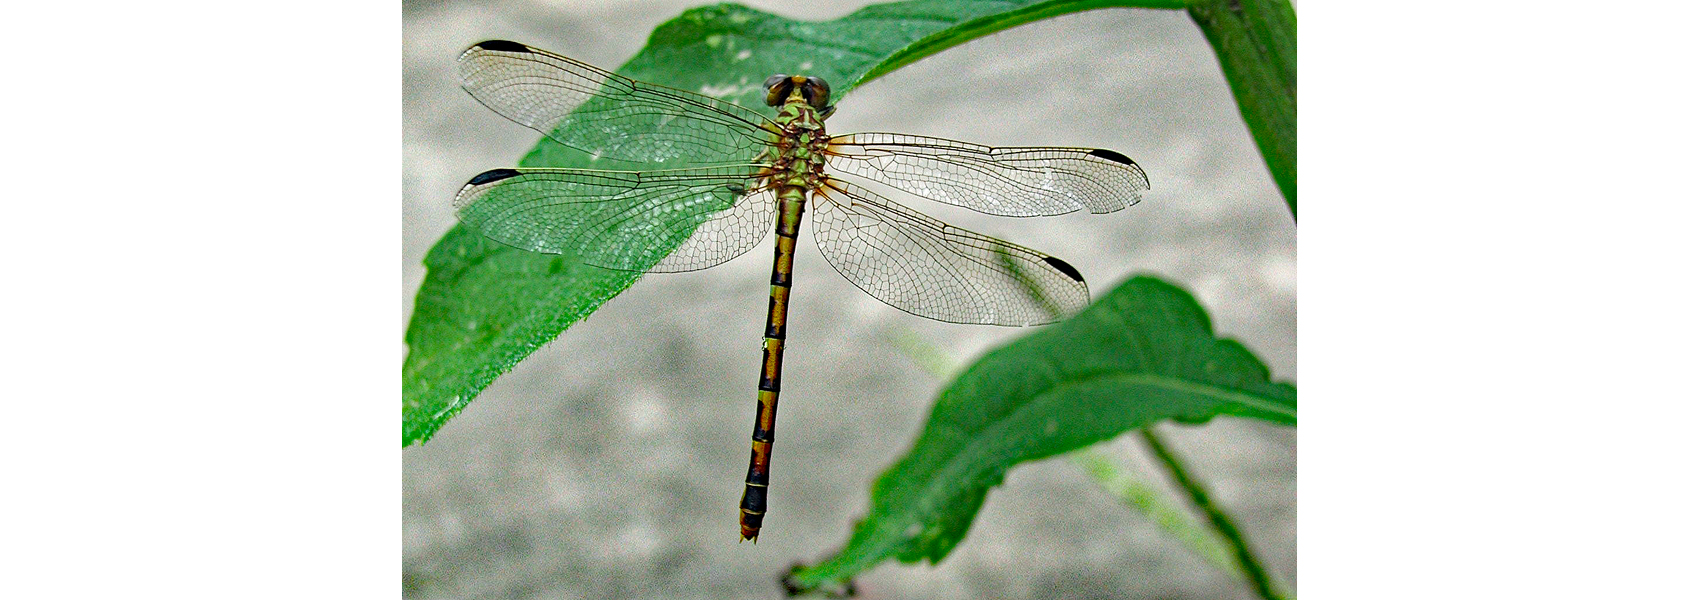 An eastern ringtail dragonfly